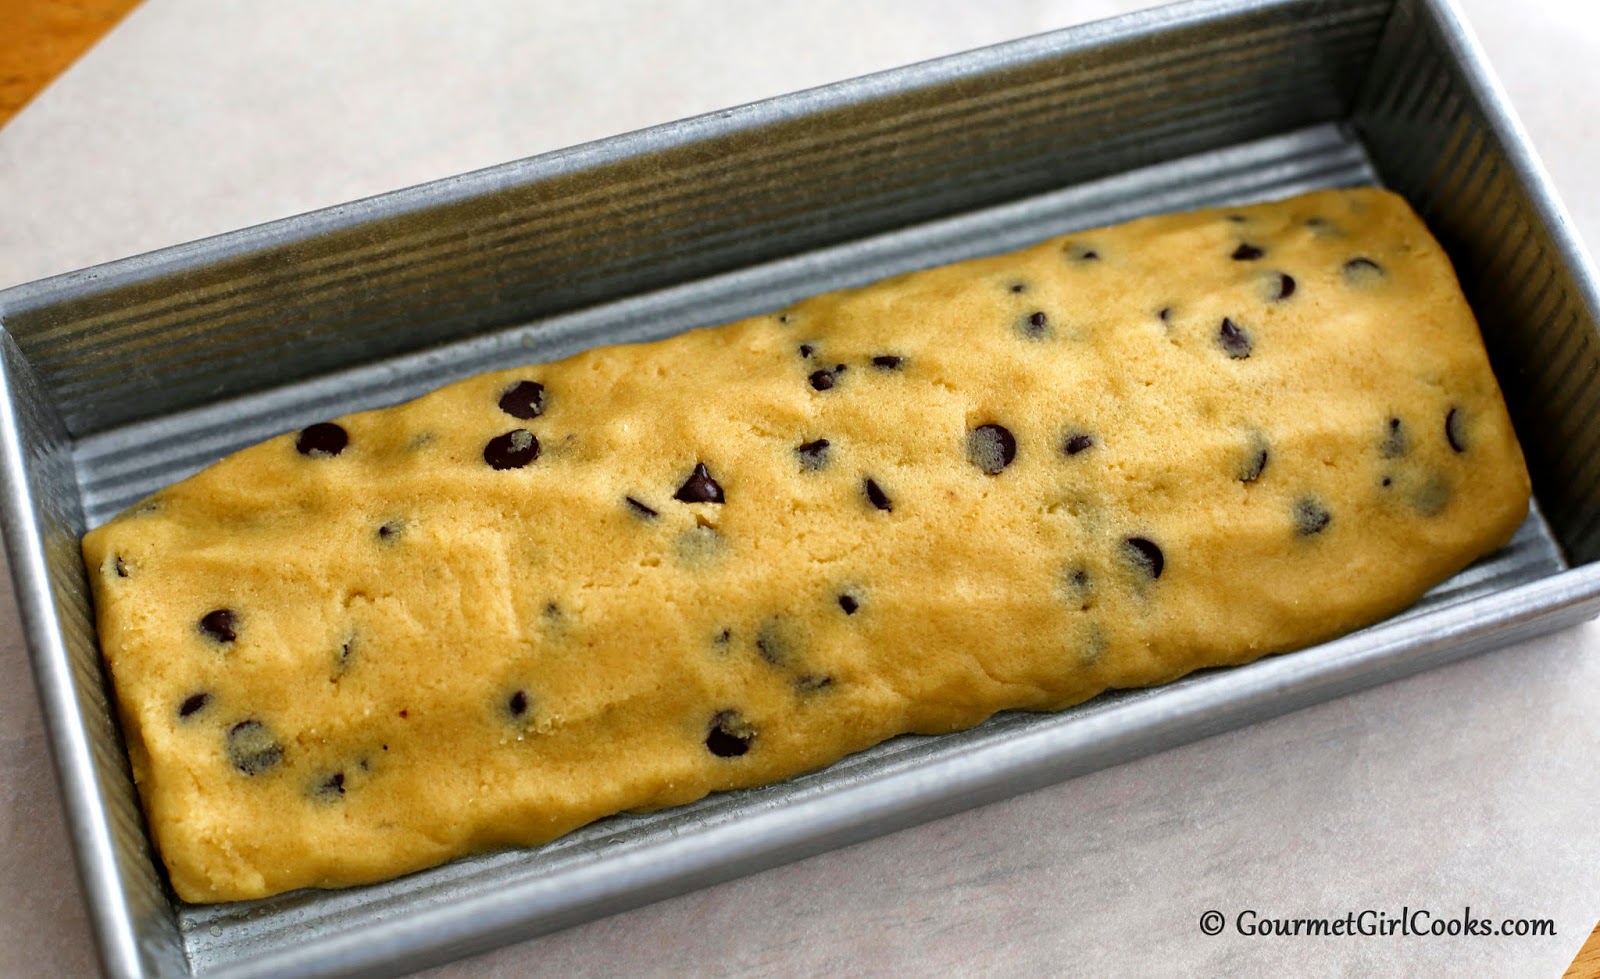 Gourmet Girl Cooks: Chocolate Chip Biscotti - Throwback Thursday